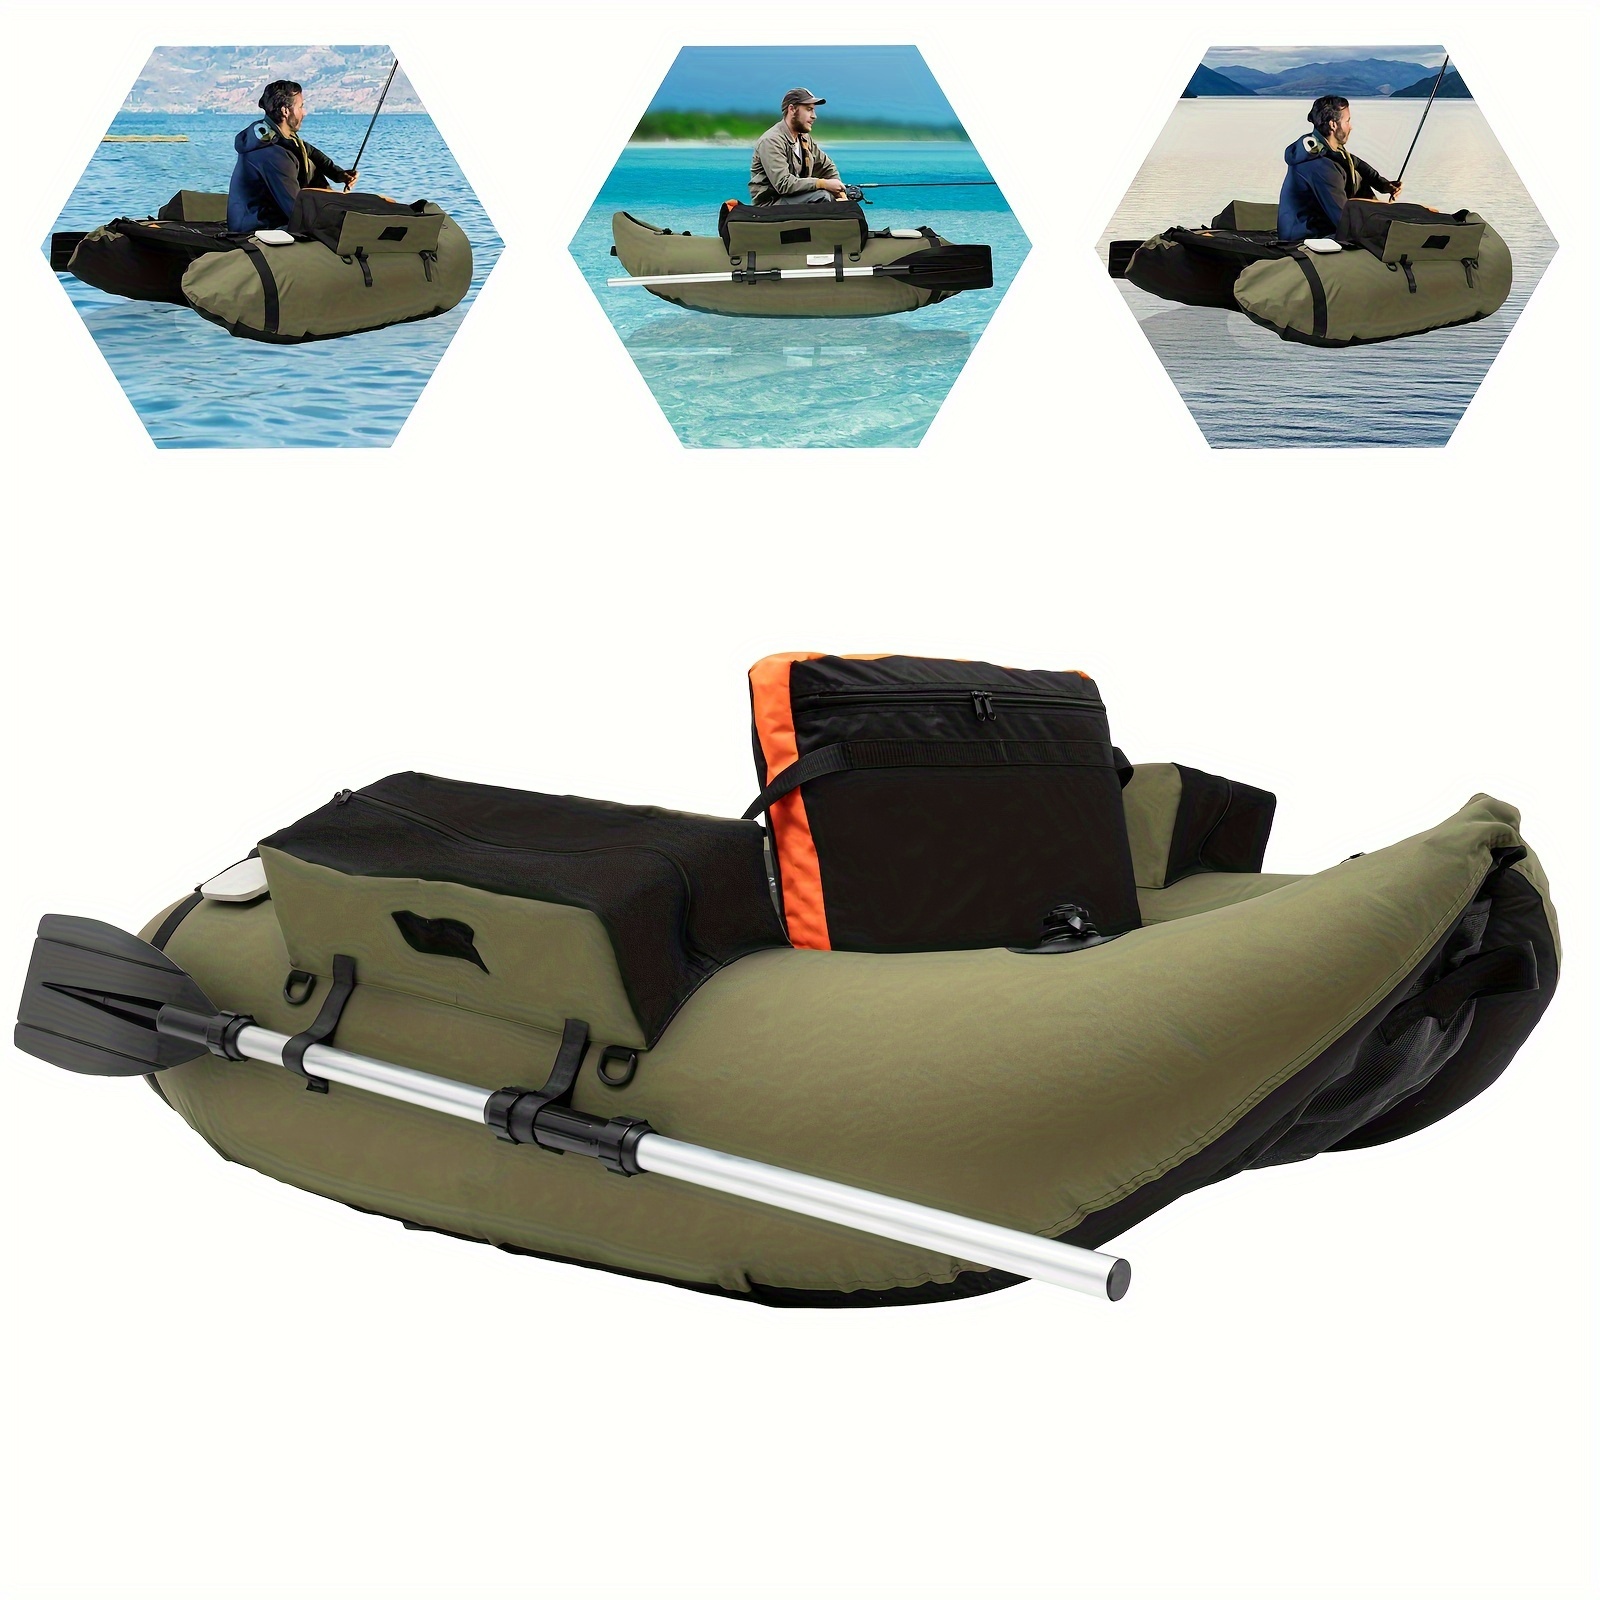 Outdoor Inflatable Portable Fishing Boat Used In Oceans Lakes